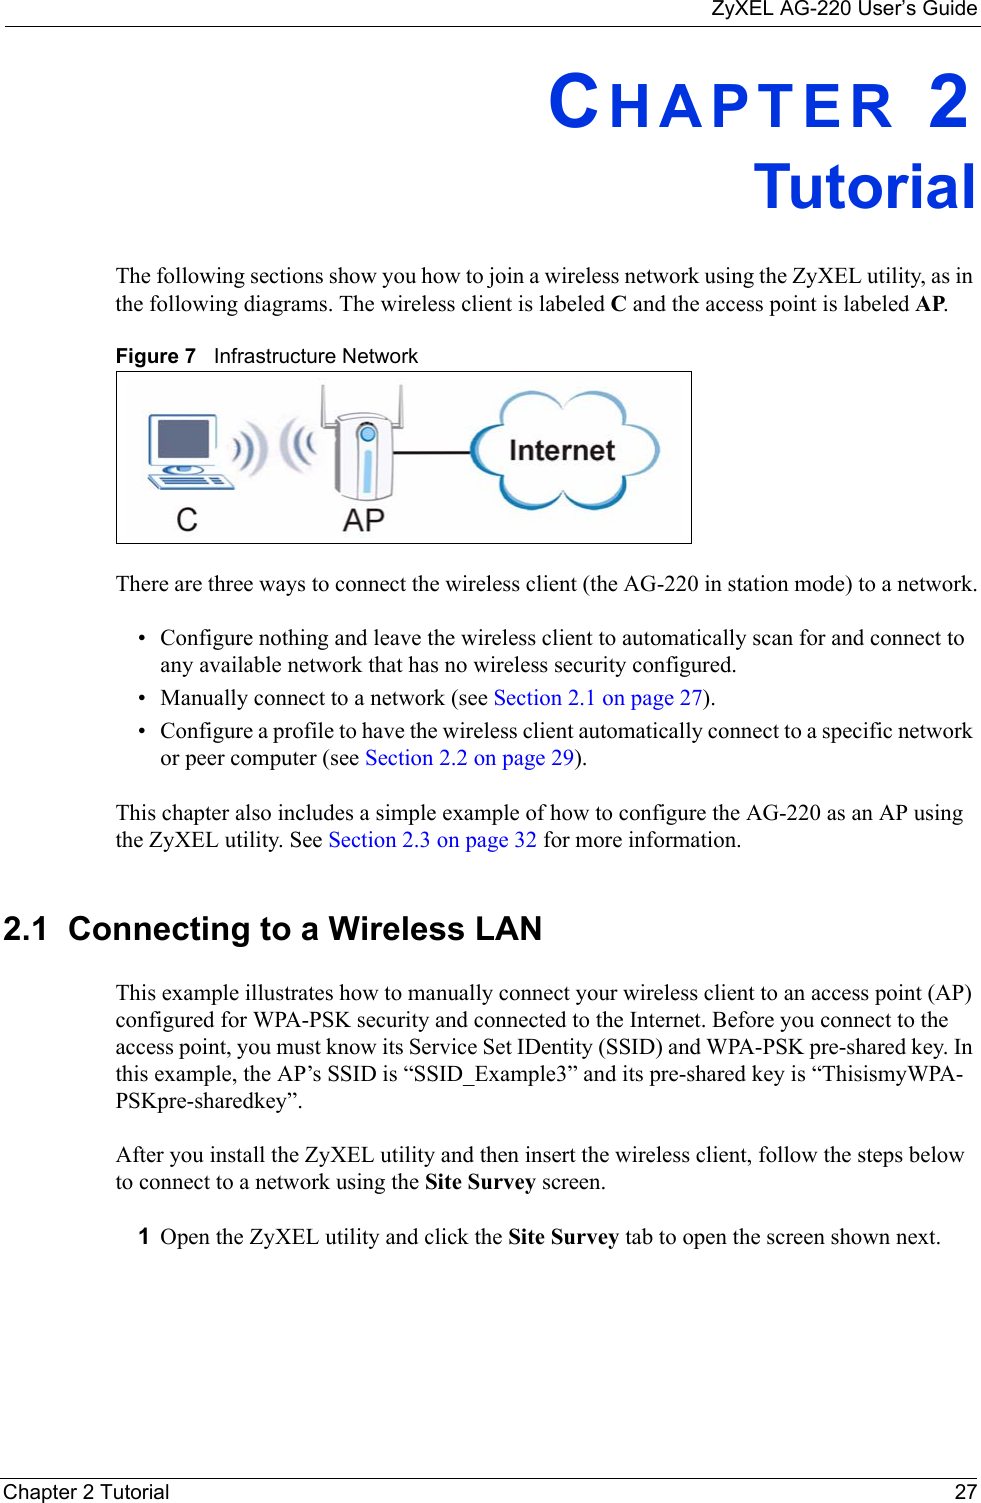 ZyXEL AG-220 User’s GuideChapter 2 Tutorial 27CHAPTER 2TutorialThe following sections show you how to join a wireless network using the ZyXEL utility, as in the following diagrams. The wireless client is labeled C and the access point is labeled AP. Figure 7   Infrastructure NetworkThere are three ways to connect the wireless client (the AG-220 in station mode) to a network.• Configure nothing and leave the wireless client to automatically scan for and connect to any available network that has no wireless security configured.• Manually connect to a network (see Section 2.1 on page 27).• Configure a profile to have the wireless client automatically connect to a specific network or peer computer (see Section 2.2 on page 29). This chapter also includes a simple example of how to configure the AG-220 as an AP using the ZyXEL utility. See Section 2.3 on page 32 for more information.2.1  Connecting to a Wireless LAN This example illustrates how to manually connect your wireless client to an access point (AP) configured for WPA-PSK security and connected to the Internet. Before you connect to the access point, you must know its Service Set IDentity (SSID) and WPA-PSK pre-shared key. In this example, the AP’s SSID is “SSID_Example3” and its pre-shared key is “ThisismyWPA-PSKpre-sharedkey”. After you install the ZyXEL utility and then insert the wireless client, follow the steps below to connect to a network using the Site Survey screen. 1Open the ZyXEL utility and click the Site Survey tab to open the screen shown next.